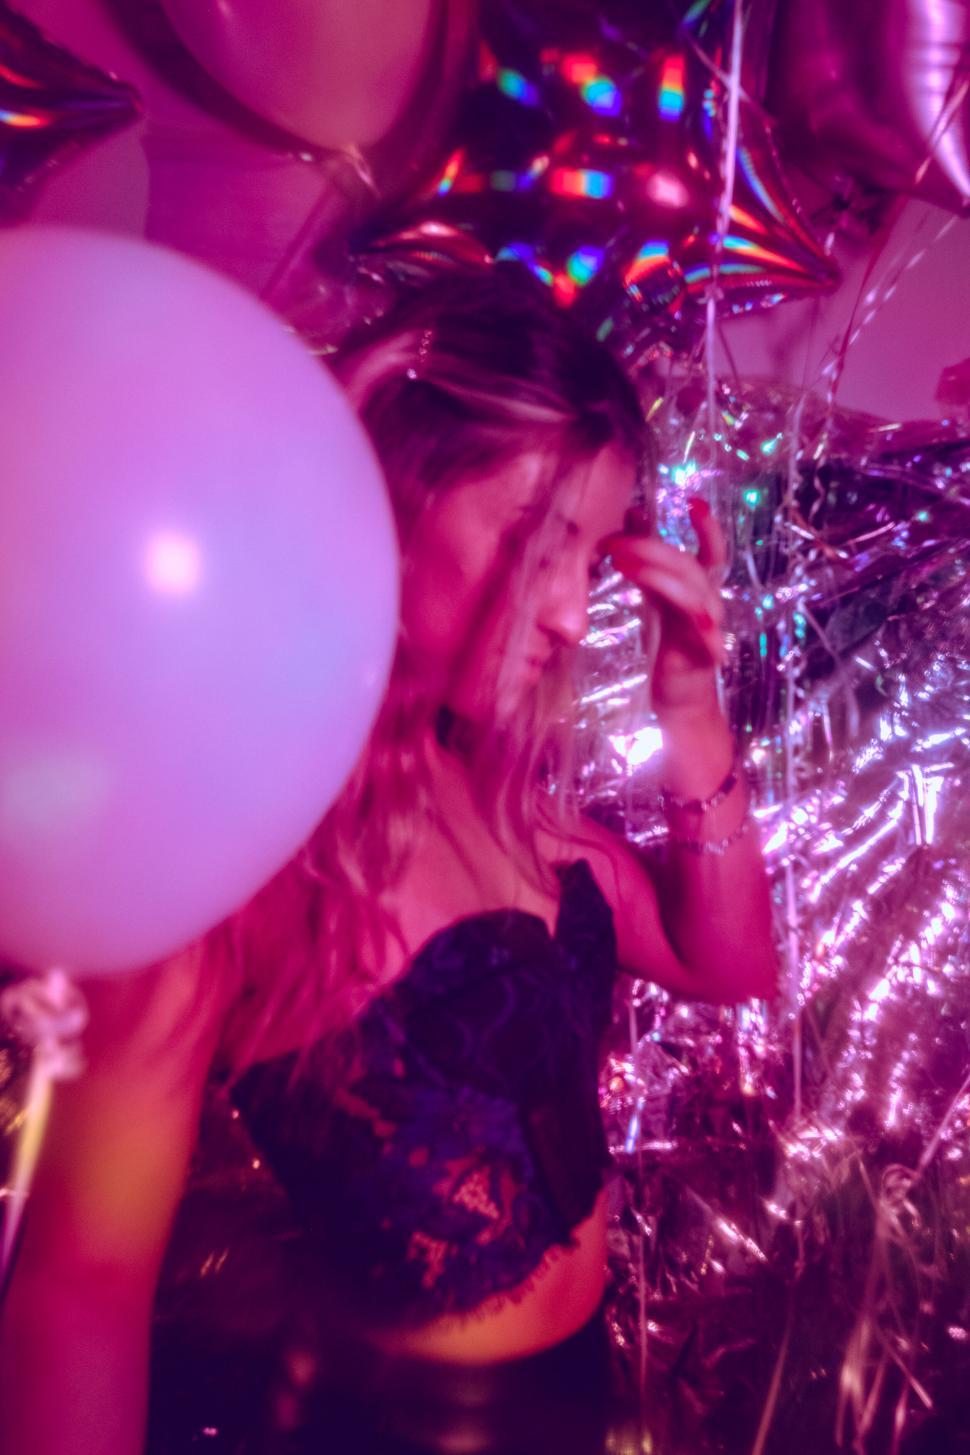 Free Image of Party girl surrounded by balloons and lights 